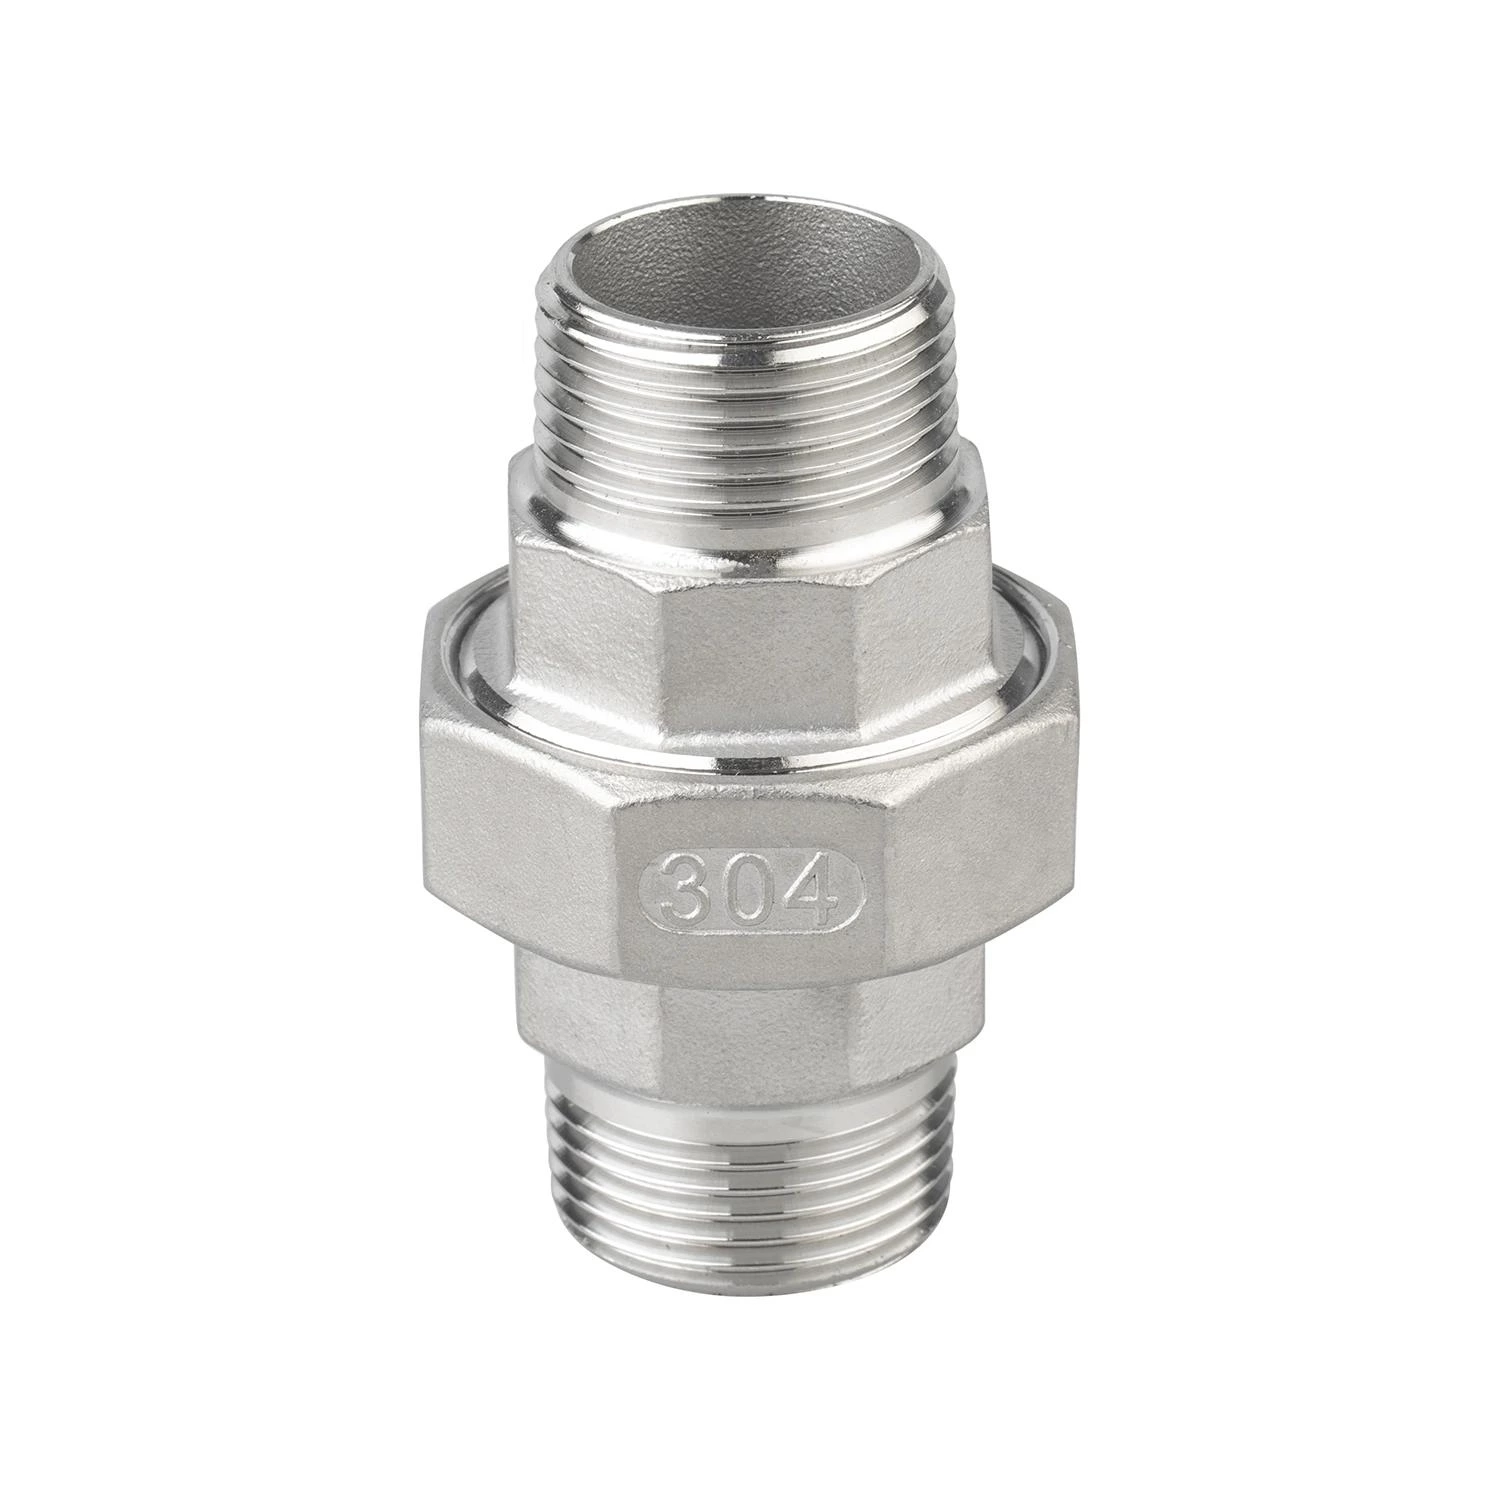 Stainless Steel Pipe Fitting 304 316 1/4"-4" NPT/BSPT Male Female Threaded Union